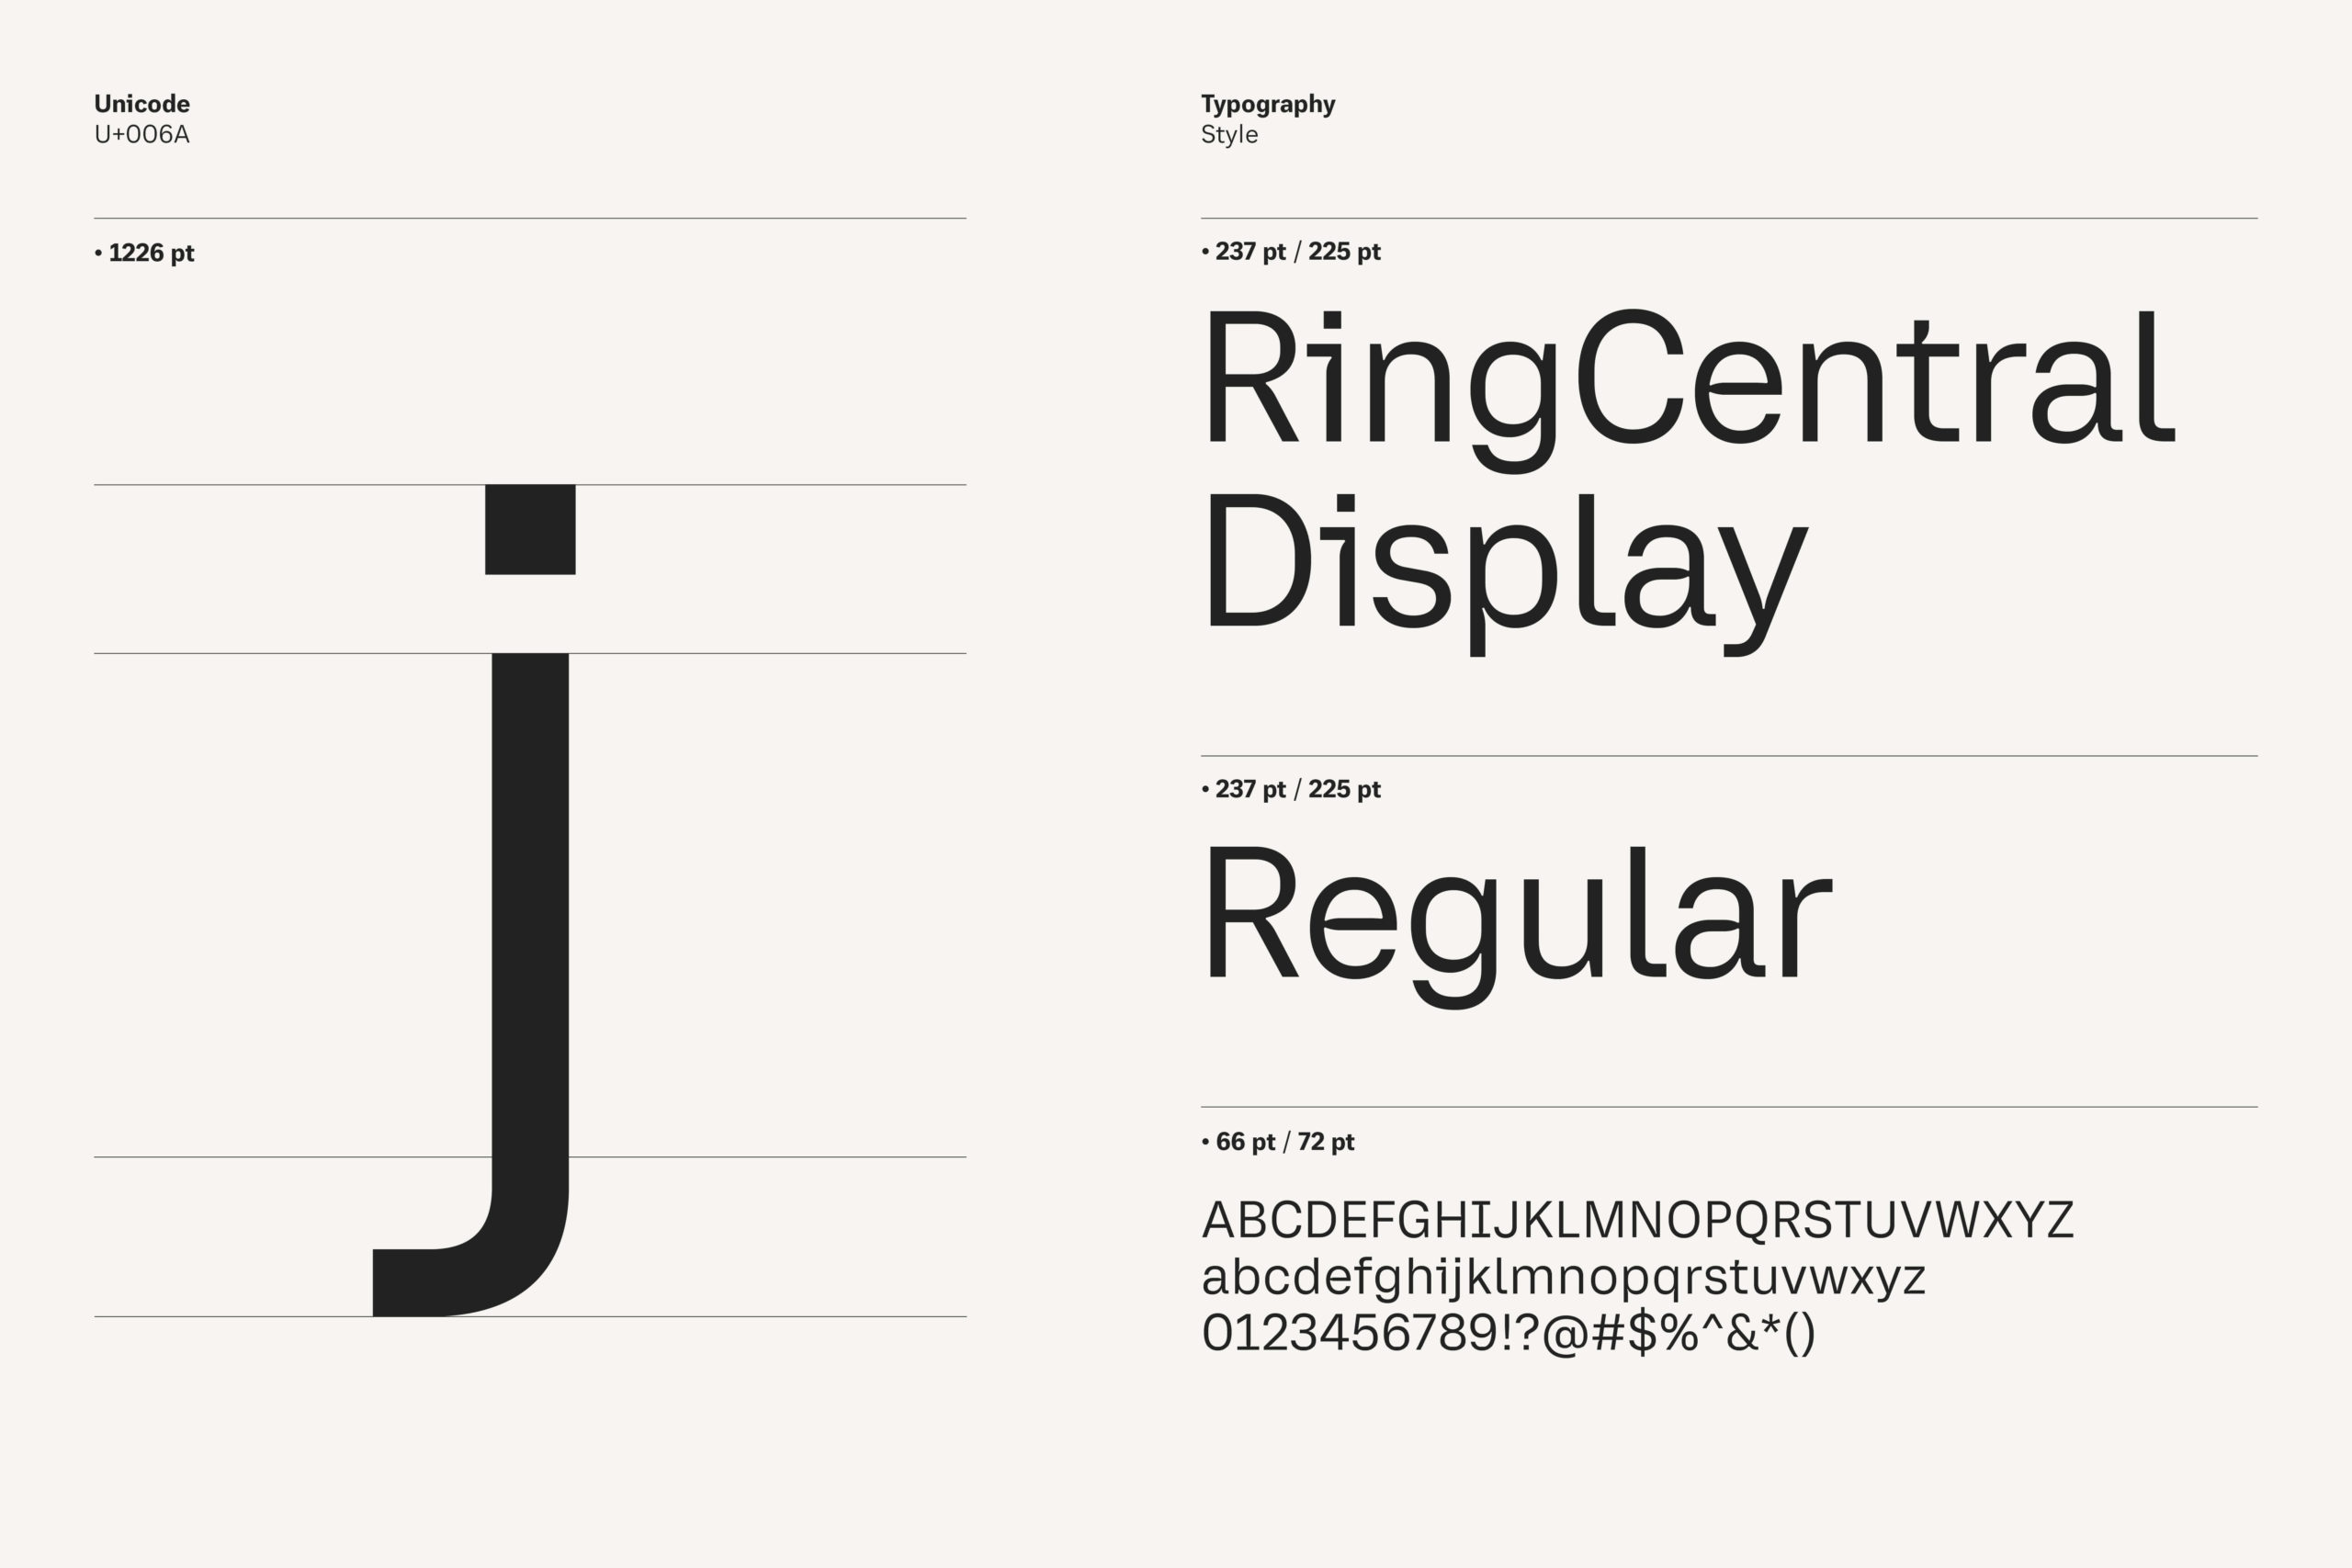 RingCentral Display_Typeface_09142210